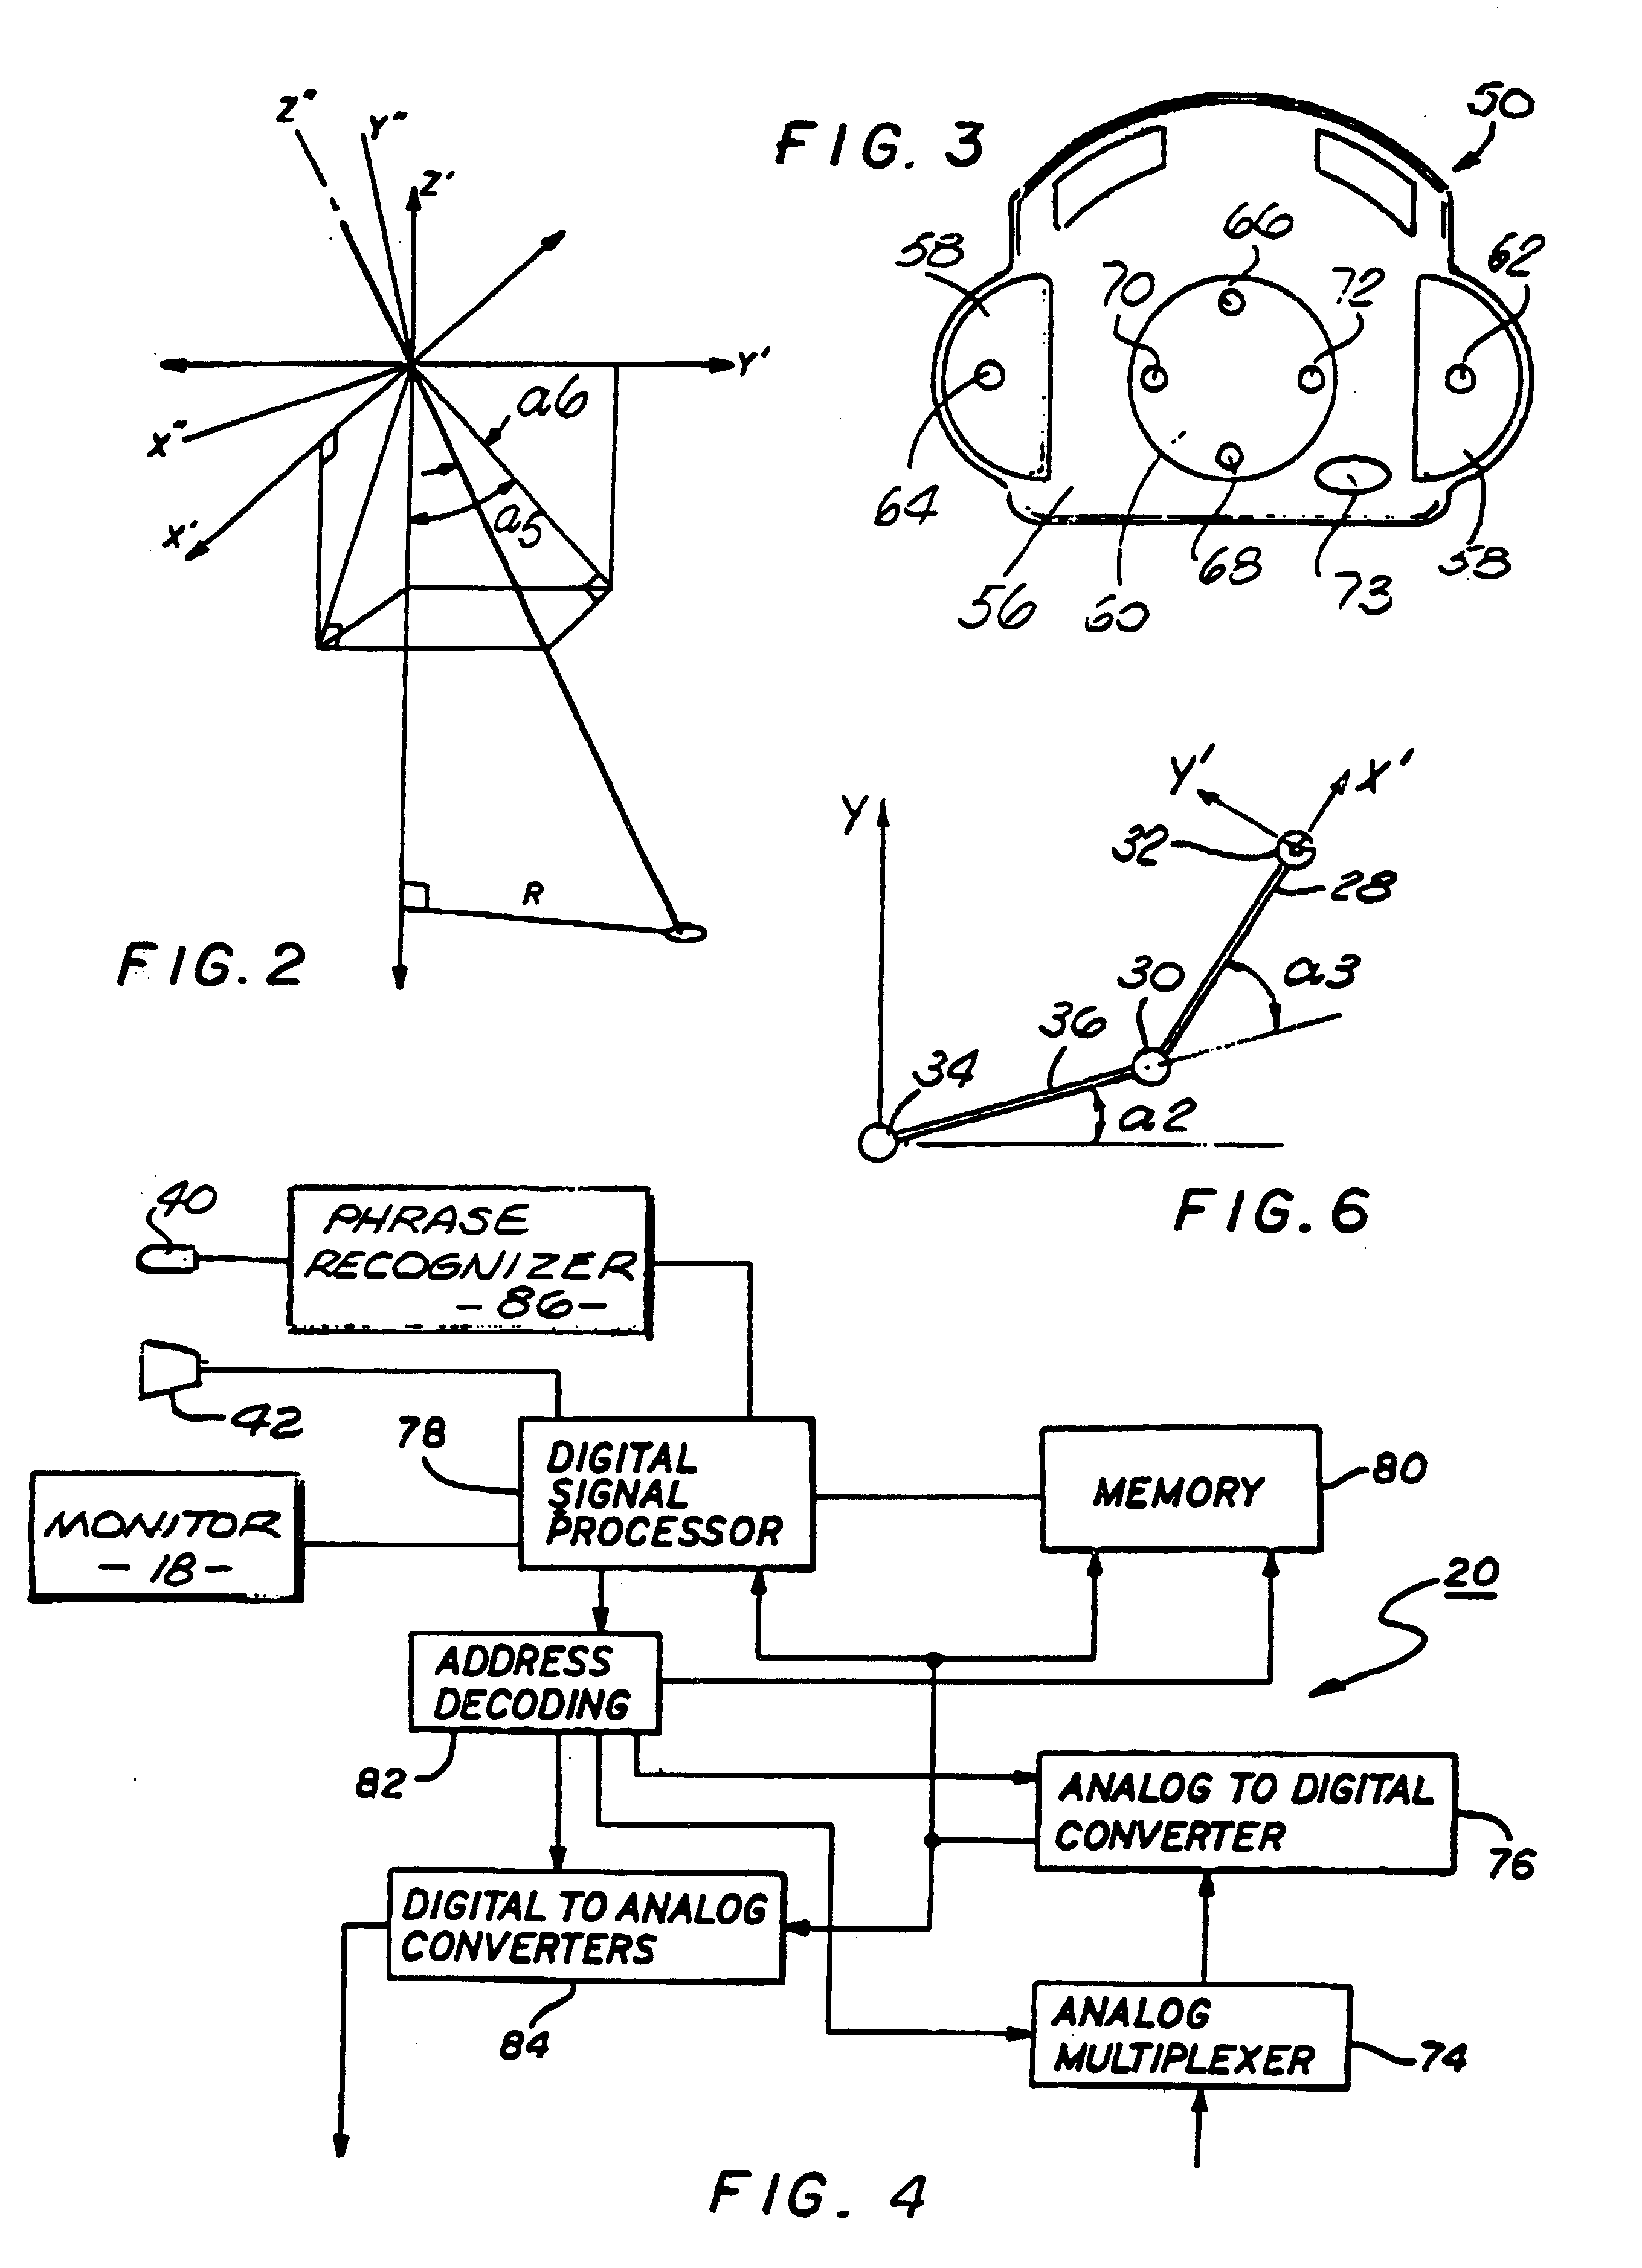 Speech interface for an automated endoscopic system